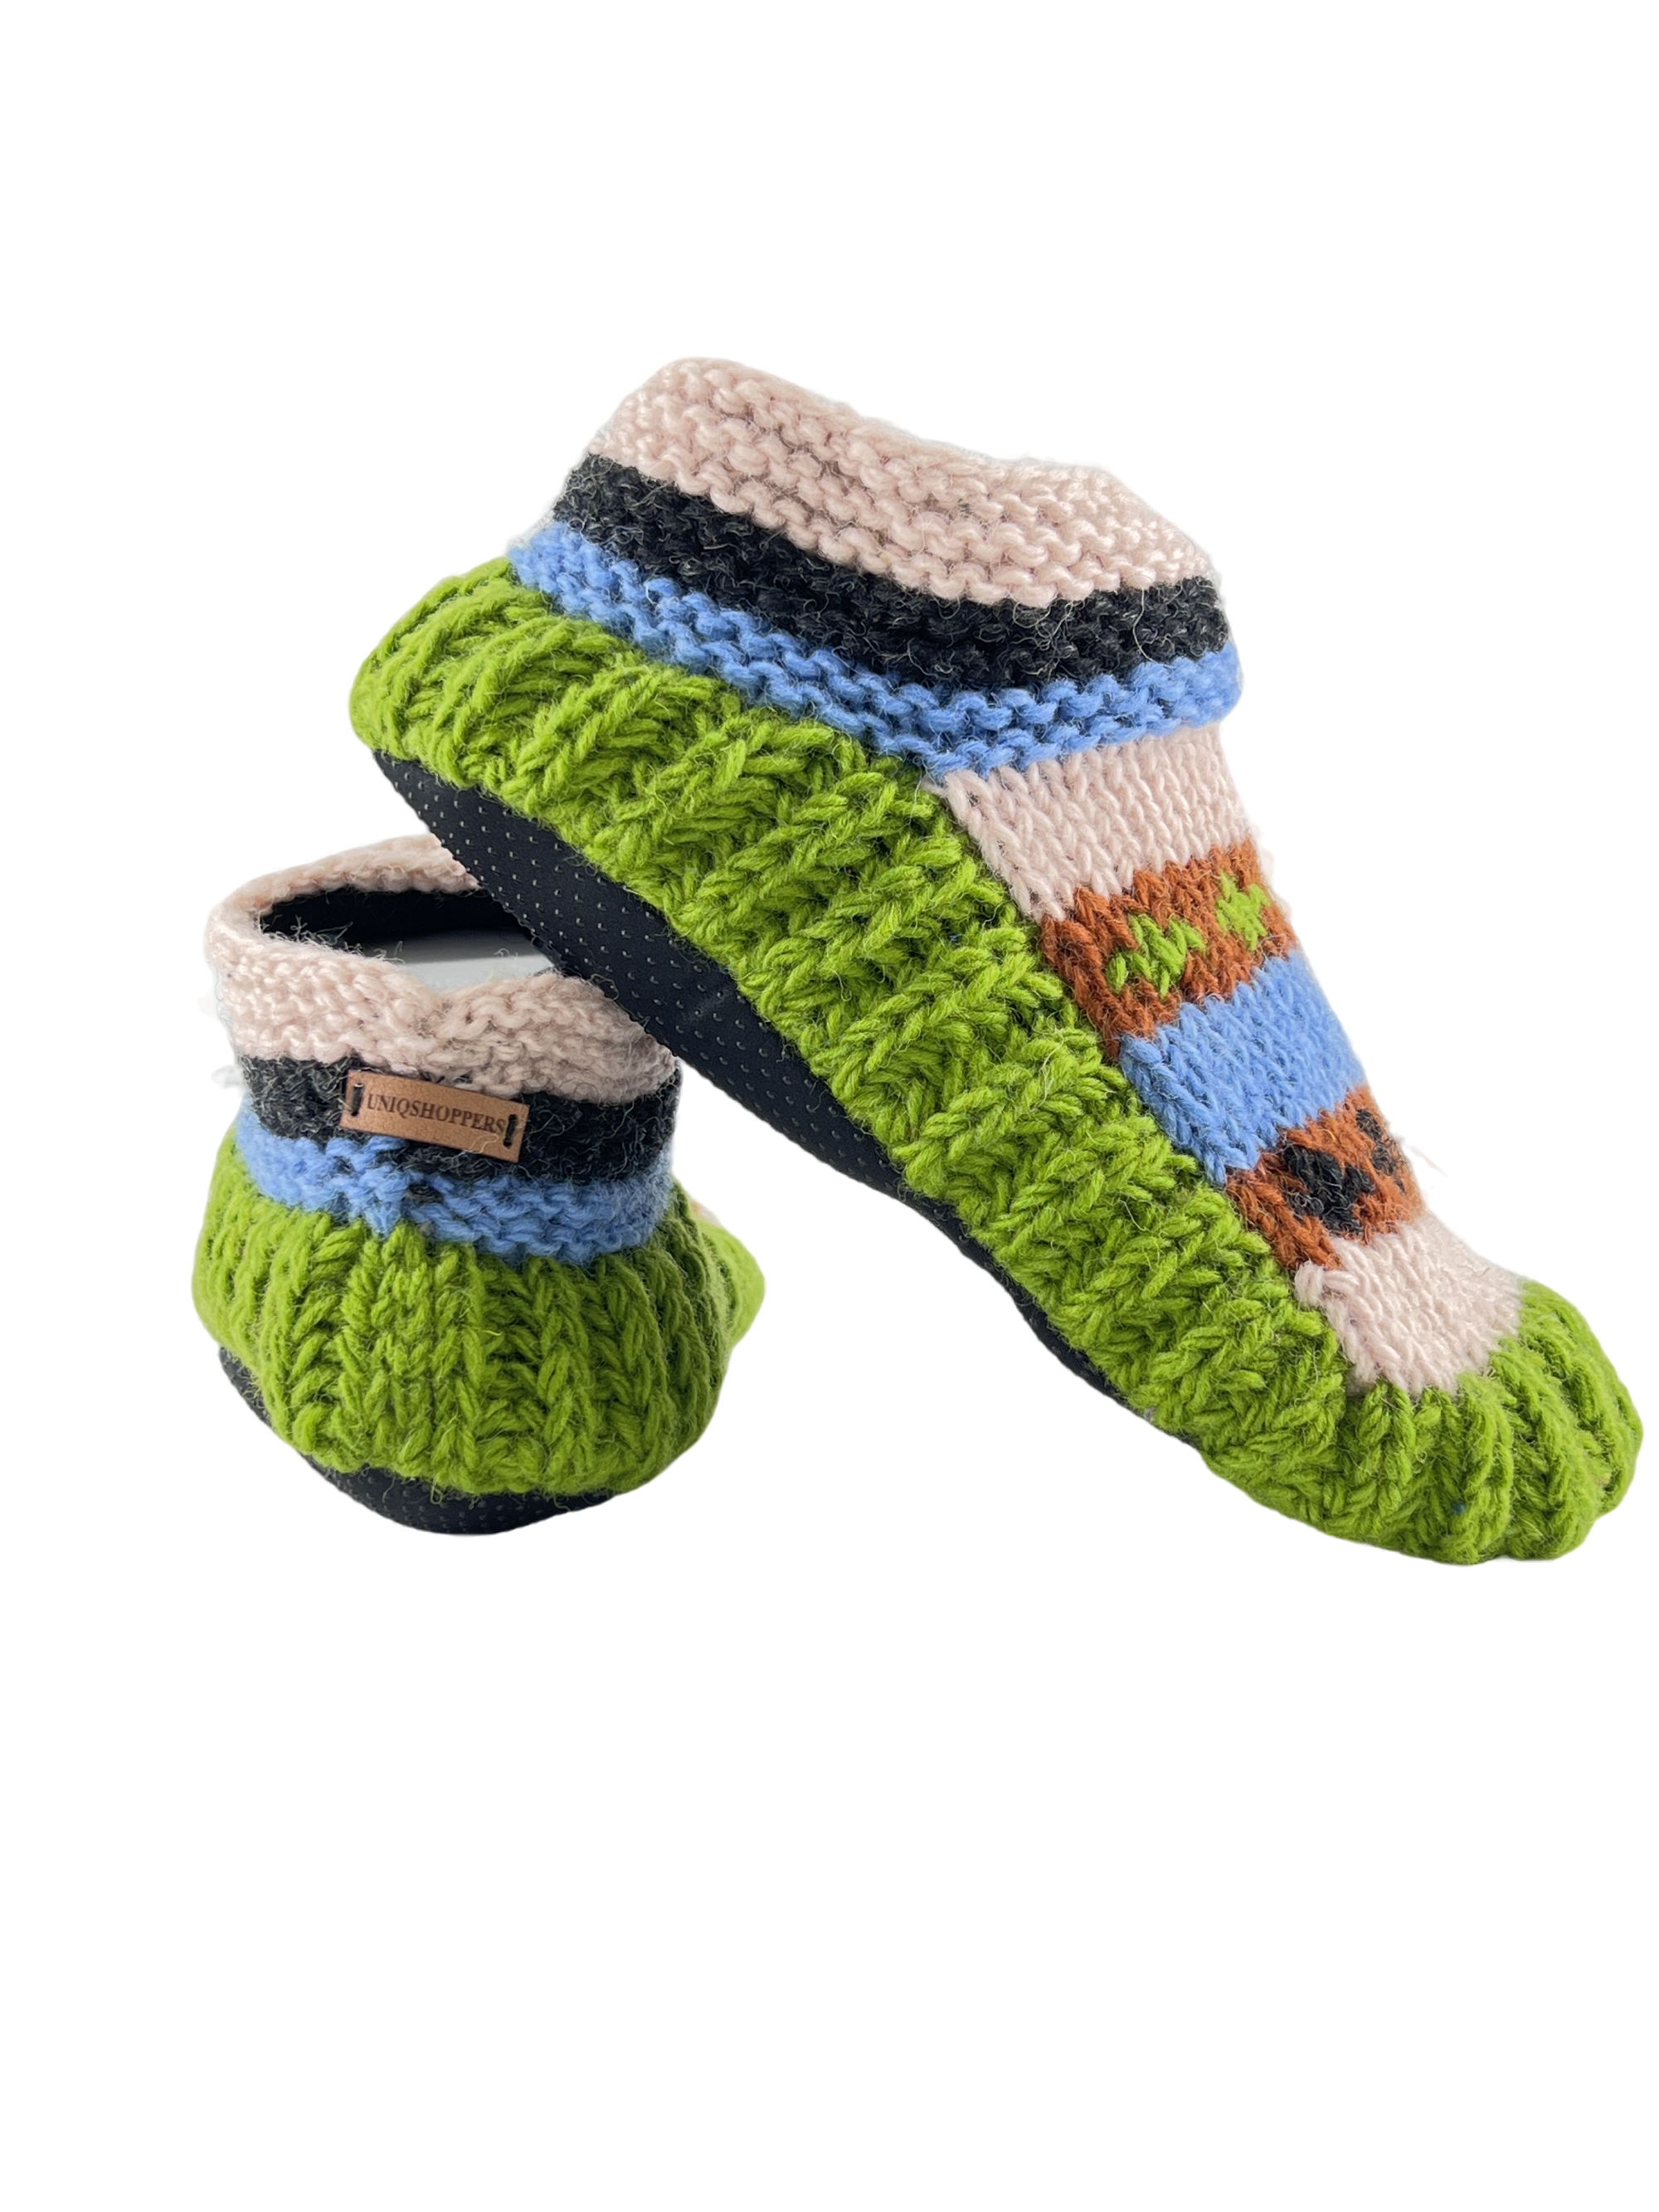 Cute socks Indoor Slippers Hand Knitted with Yak Wool | Anti-Skid Sole | Fuzzy Slippers Boots | Soft Woolen House Slippers for Men & Women